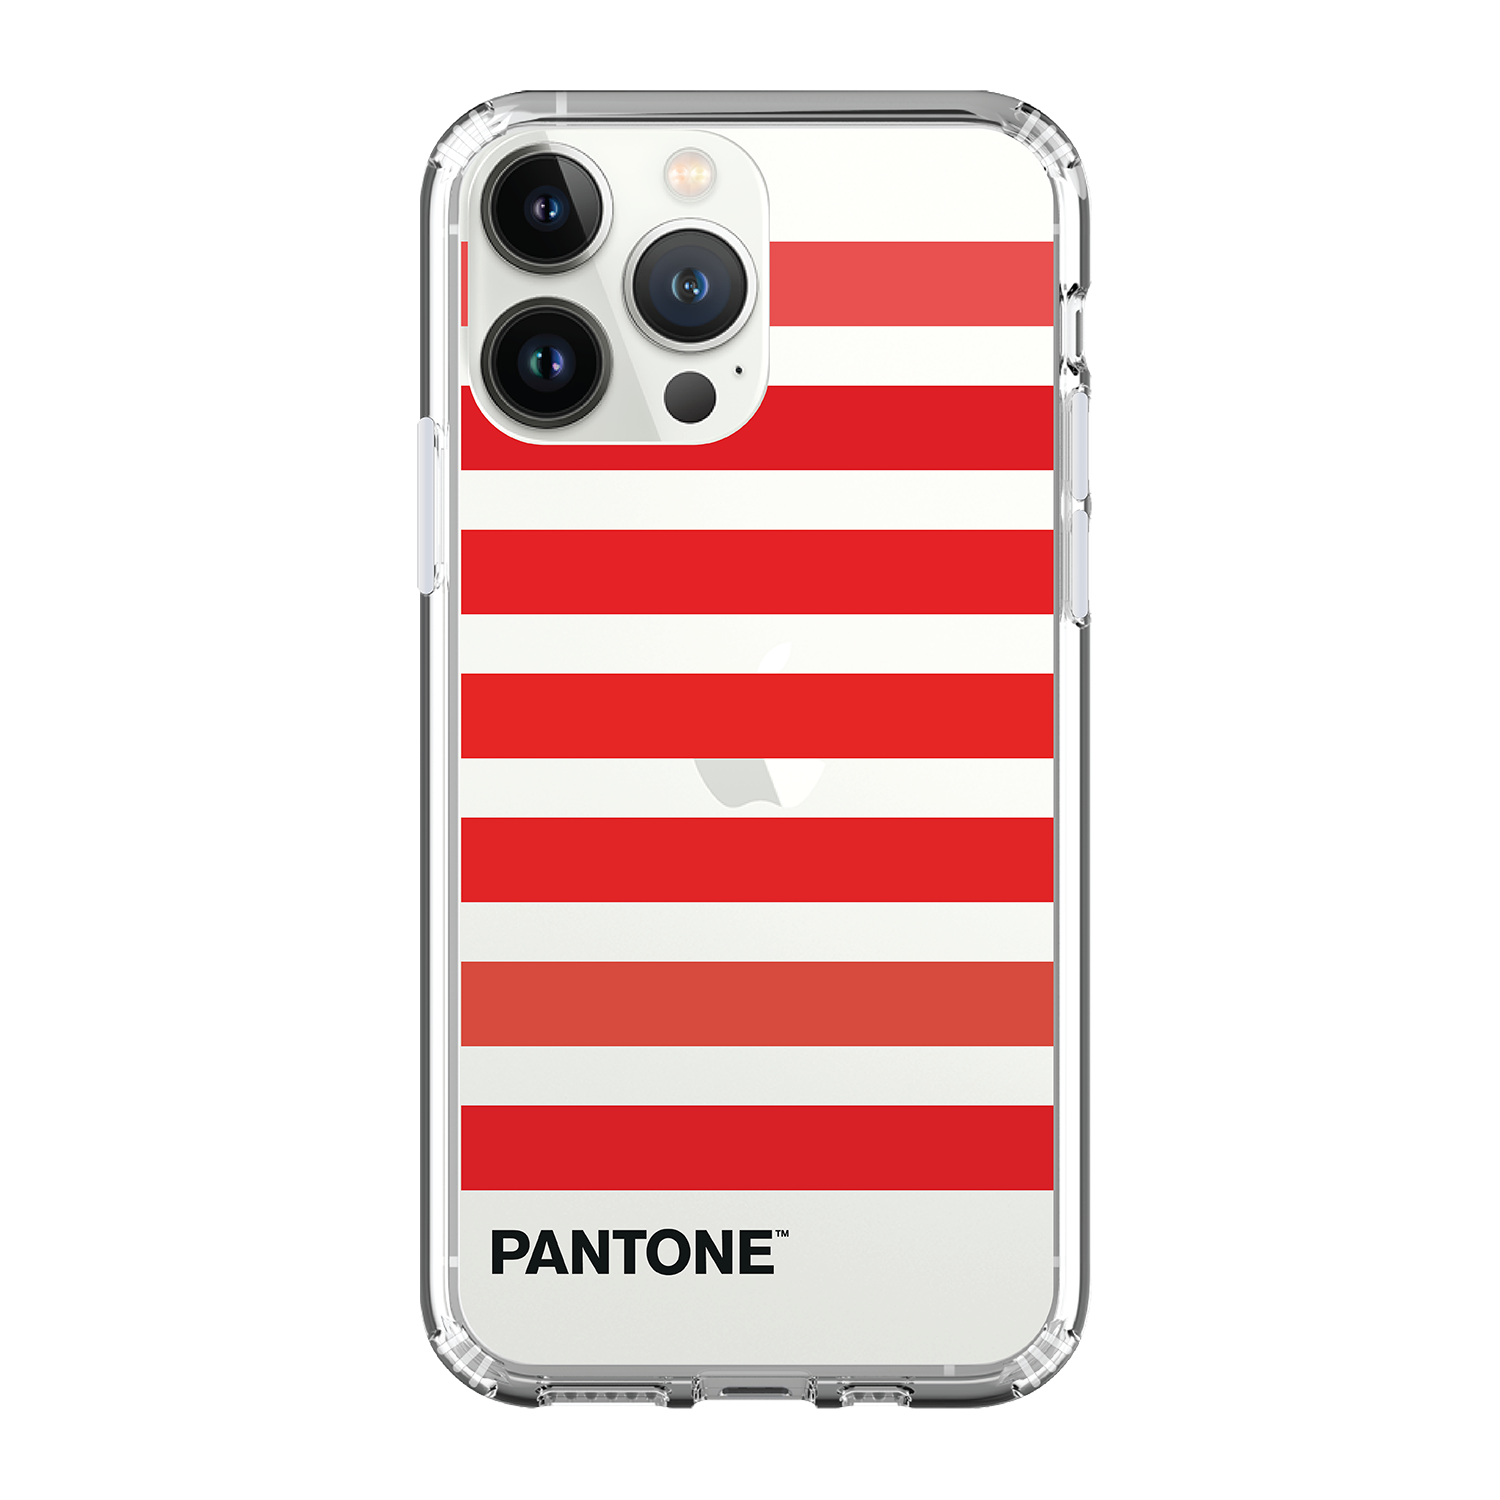 PANTONE Clear Case / iPhone Case / Android Case / Samsung Case 正版授權 全包邊氣囊防撞手機殼 (PE11)